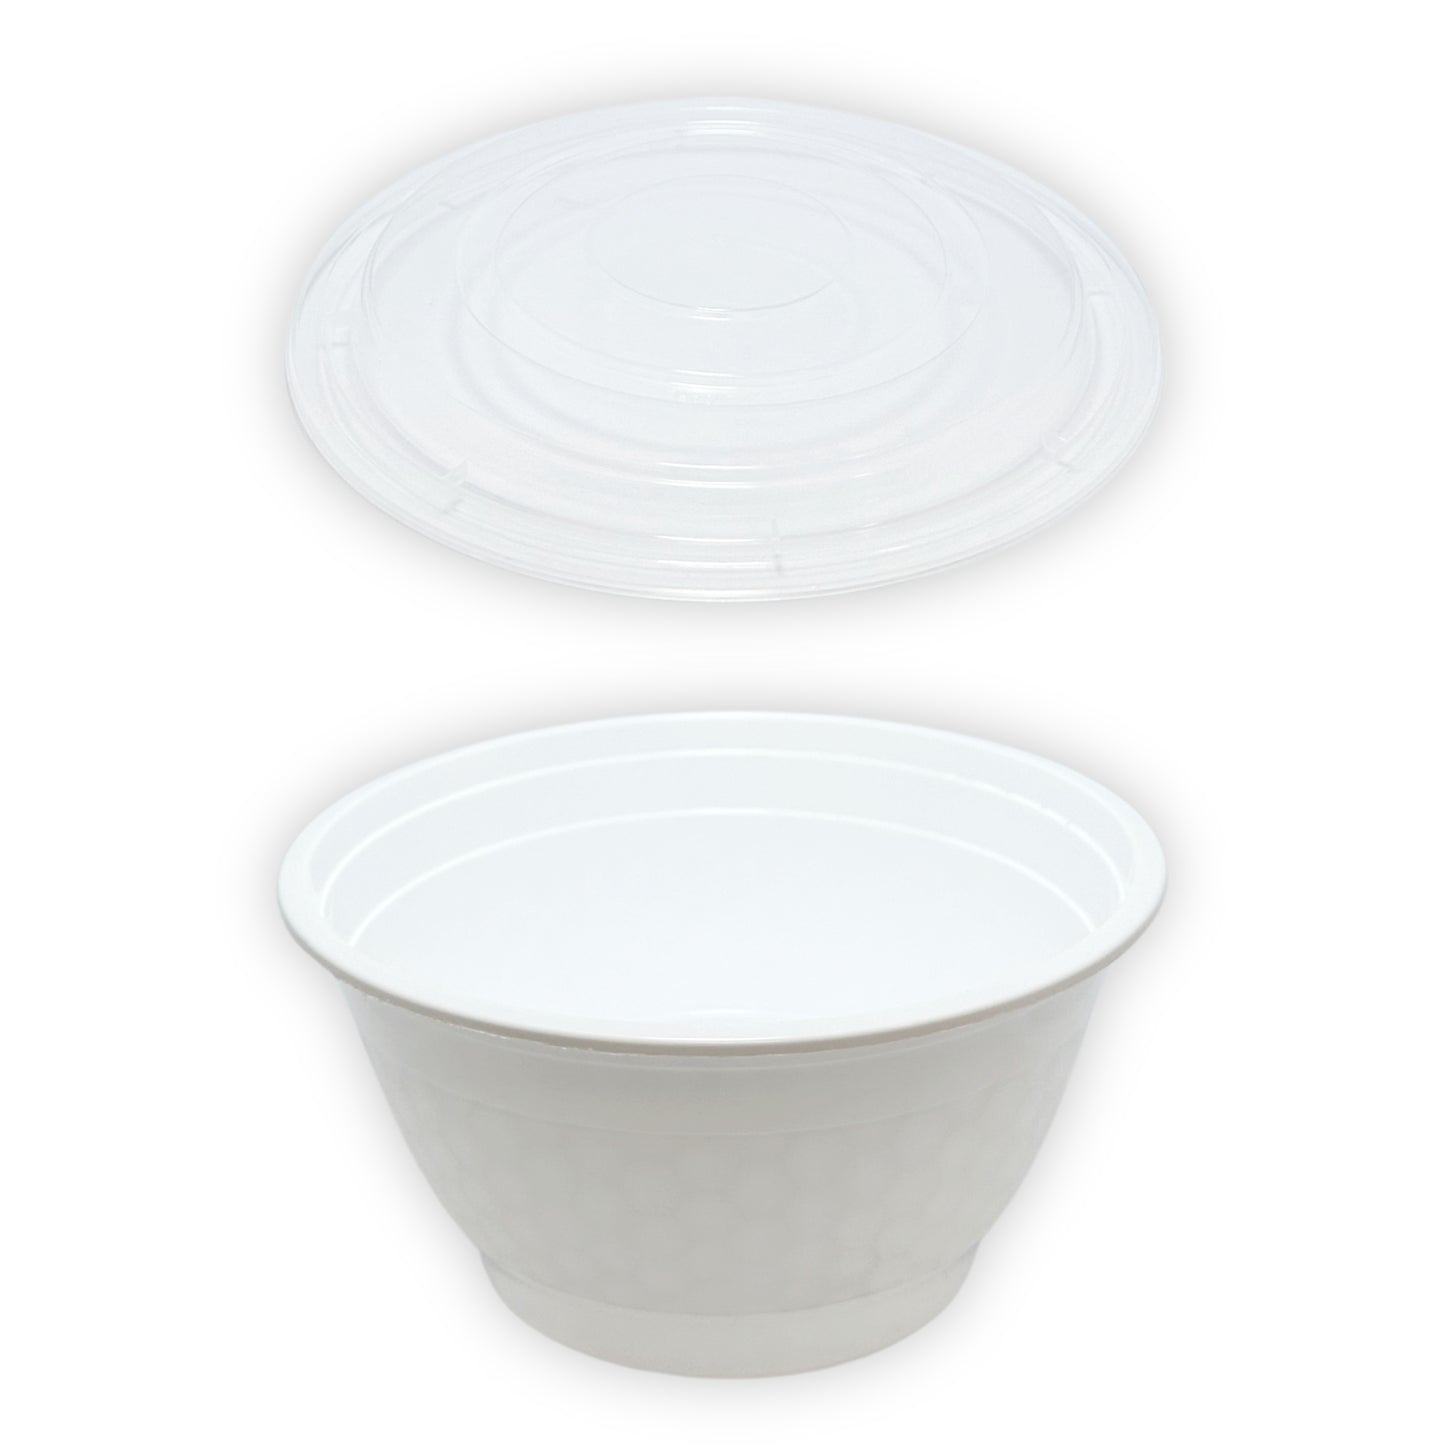 KIS-BO42G | 150sets 42oz, 1242ml White PP Round Bowl with Clear Lids Combo; $0.268/set